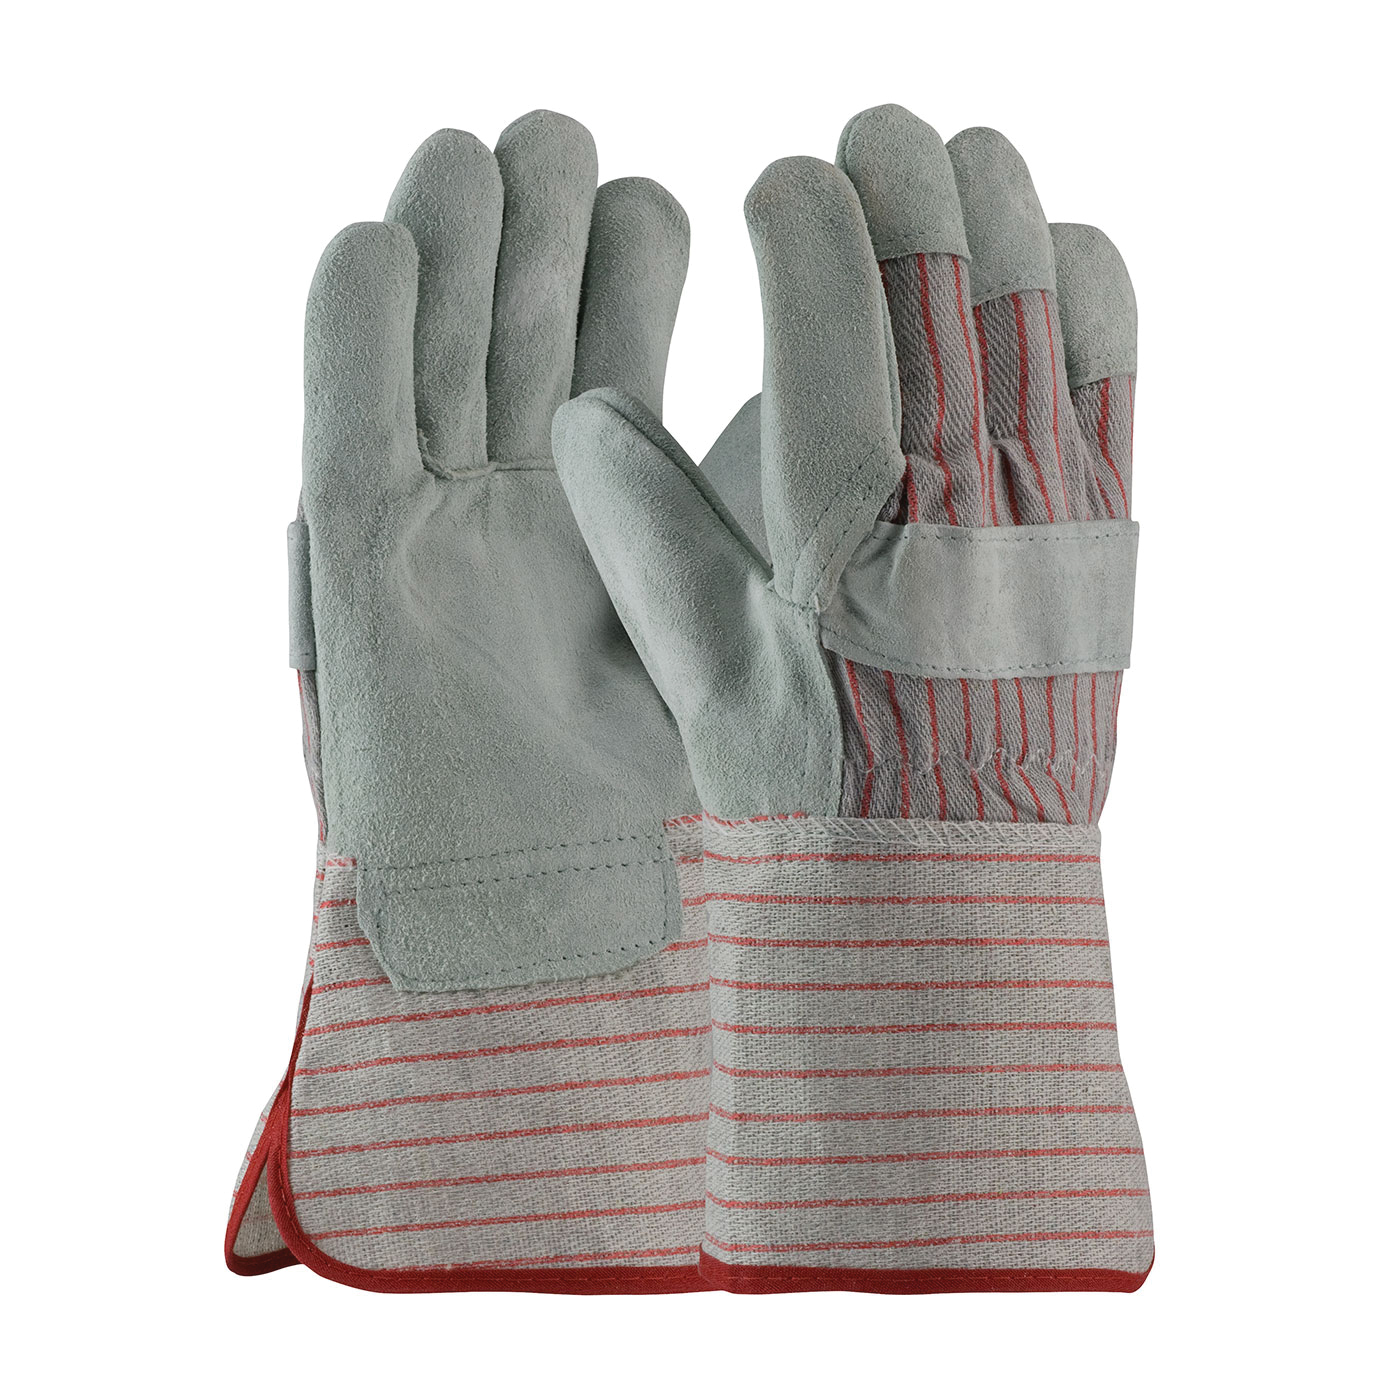 PIP® 85-7612S Economy B/C-Grade Men's General Purpose Gloves, Leather Palm/Work, Gunn Cut/Full Finger/Wing Thumb Style, Shoulder Split Cowhide Leather Palm, 75% Leather/25% Cotton, Gray/Red, Starched Gauntlet Cuff, Uncoated Coating, Cotton Lining